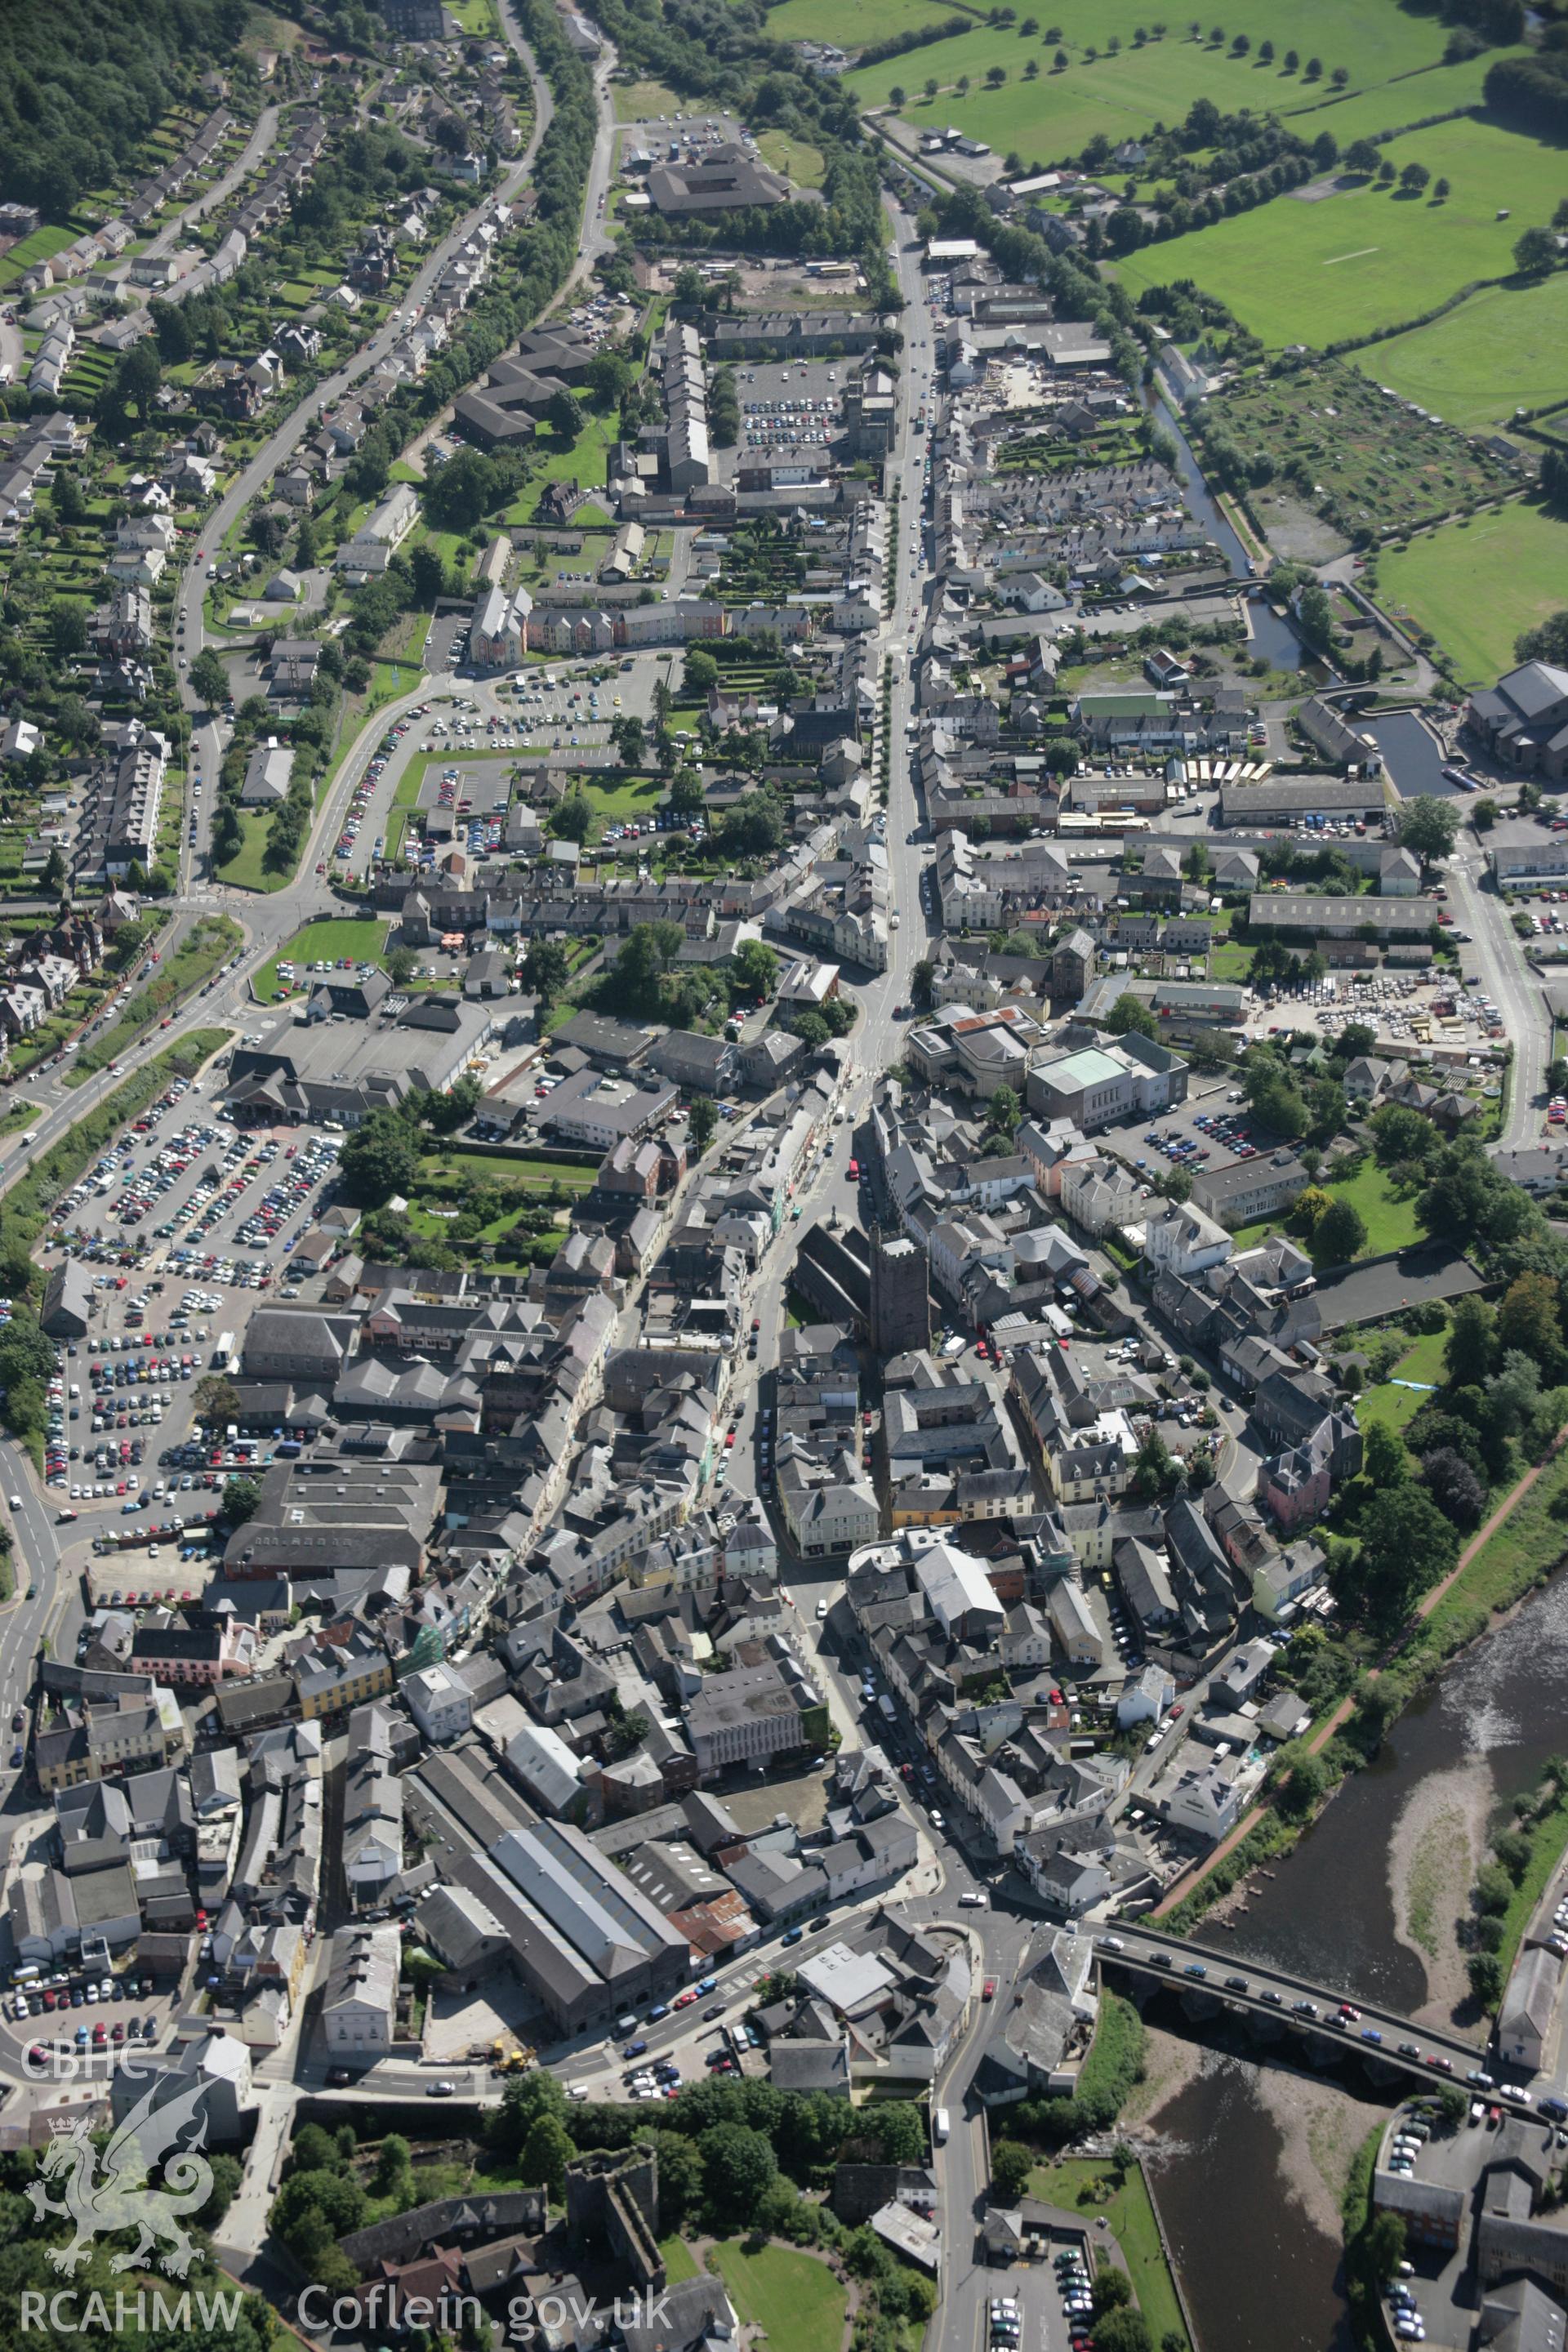 RCAHMW colour oblique aerial photograph of Brecon. A high view of the town centre looking south-east. Taken on 02 September 2005 by Toby Driver